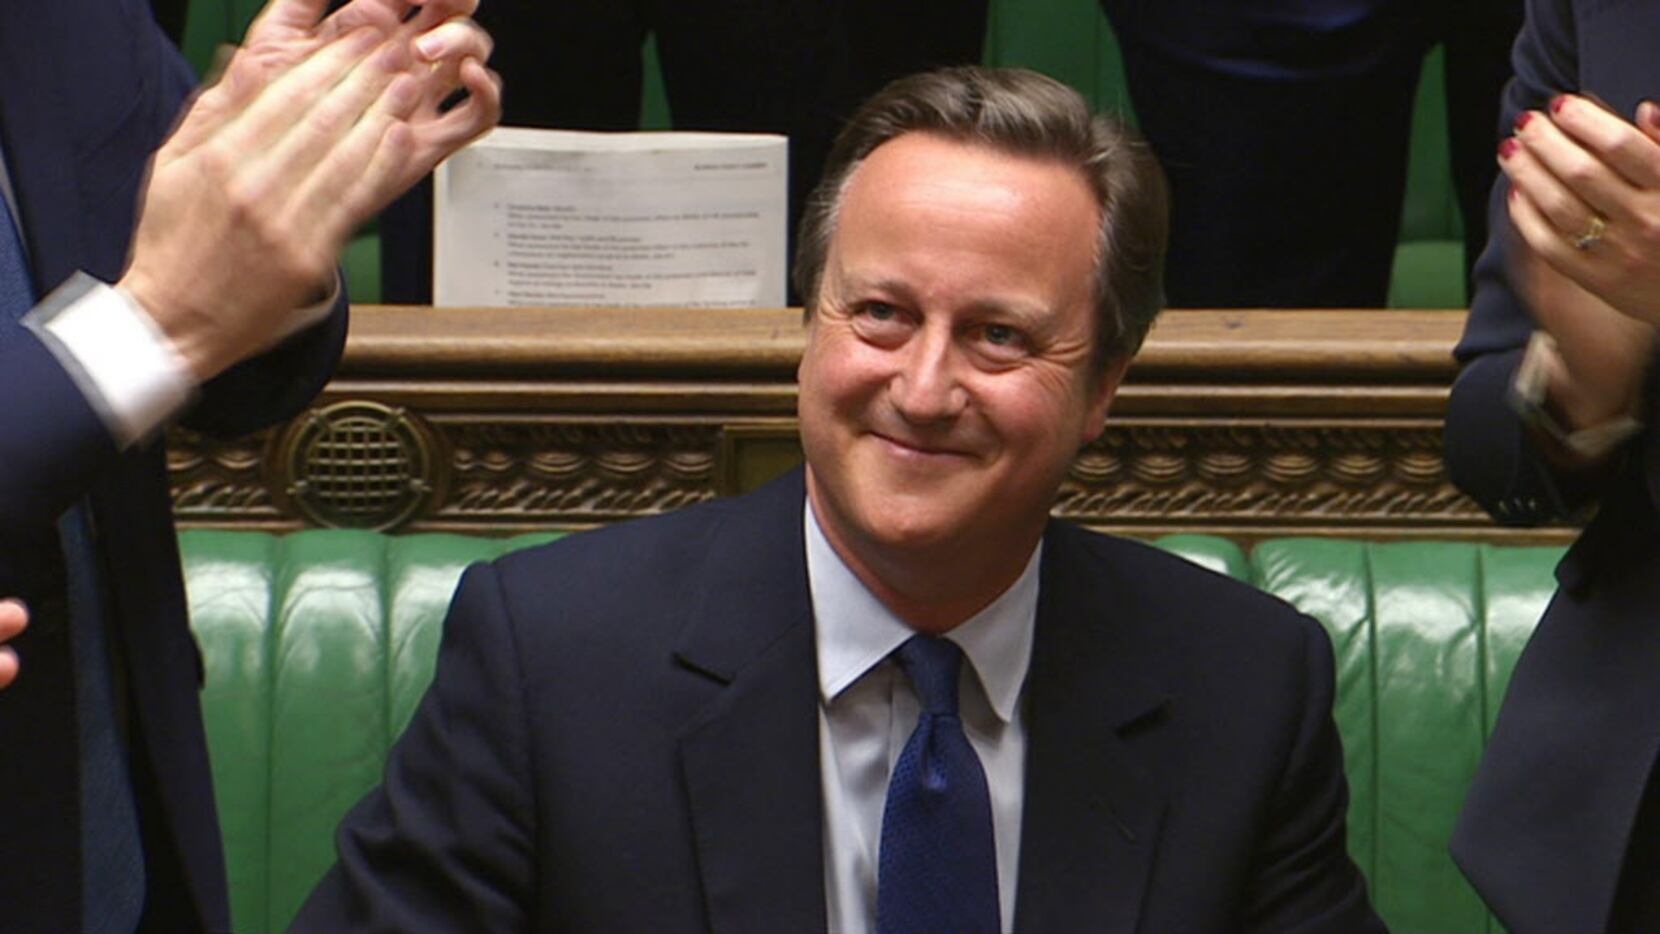 David Cameron receives a standing ovation from members of parliament at the end of his last...